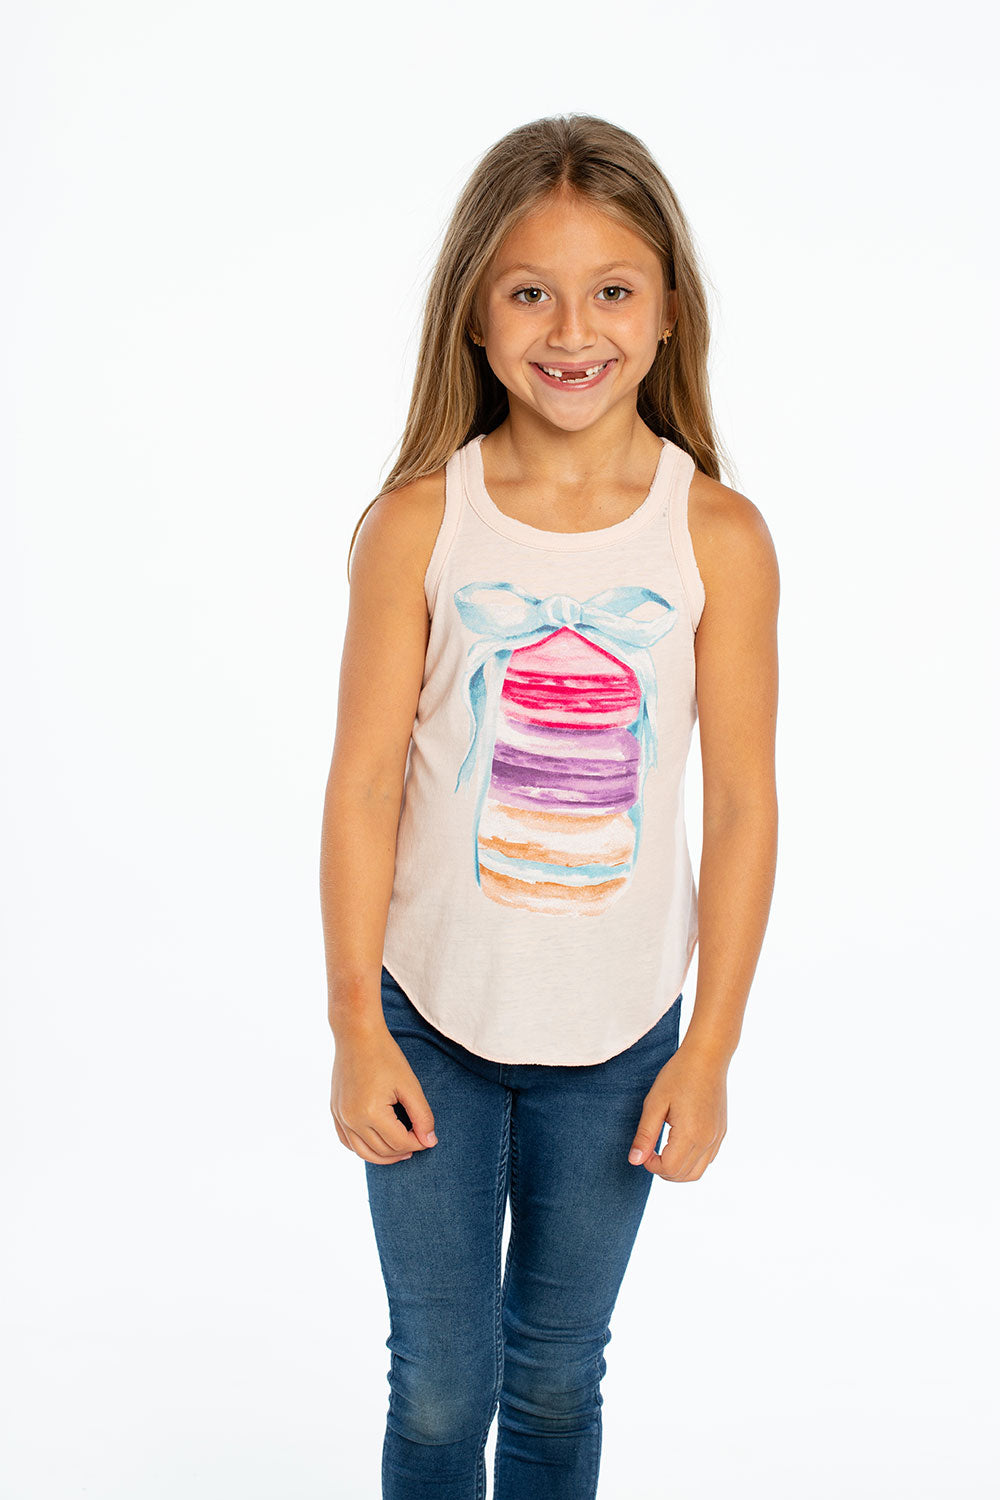 Girls Graphic Tops | chaserbrand.com